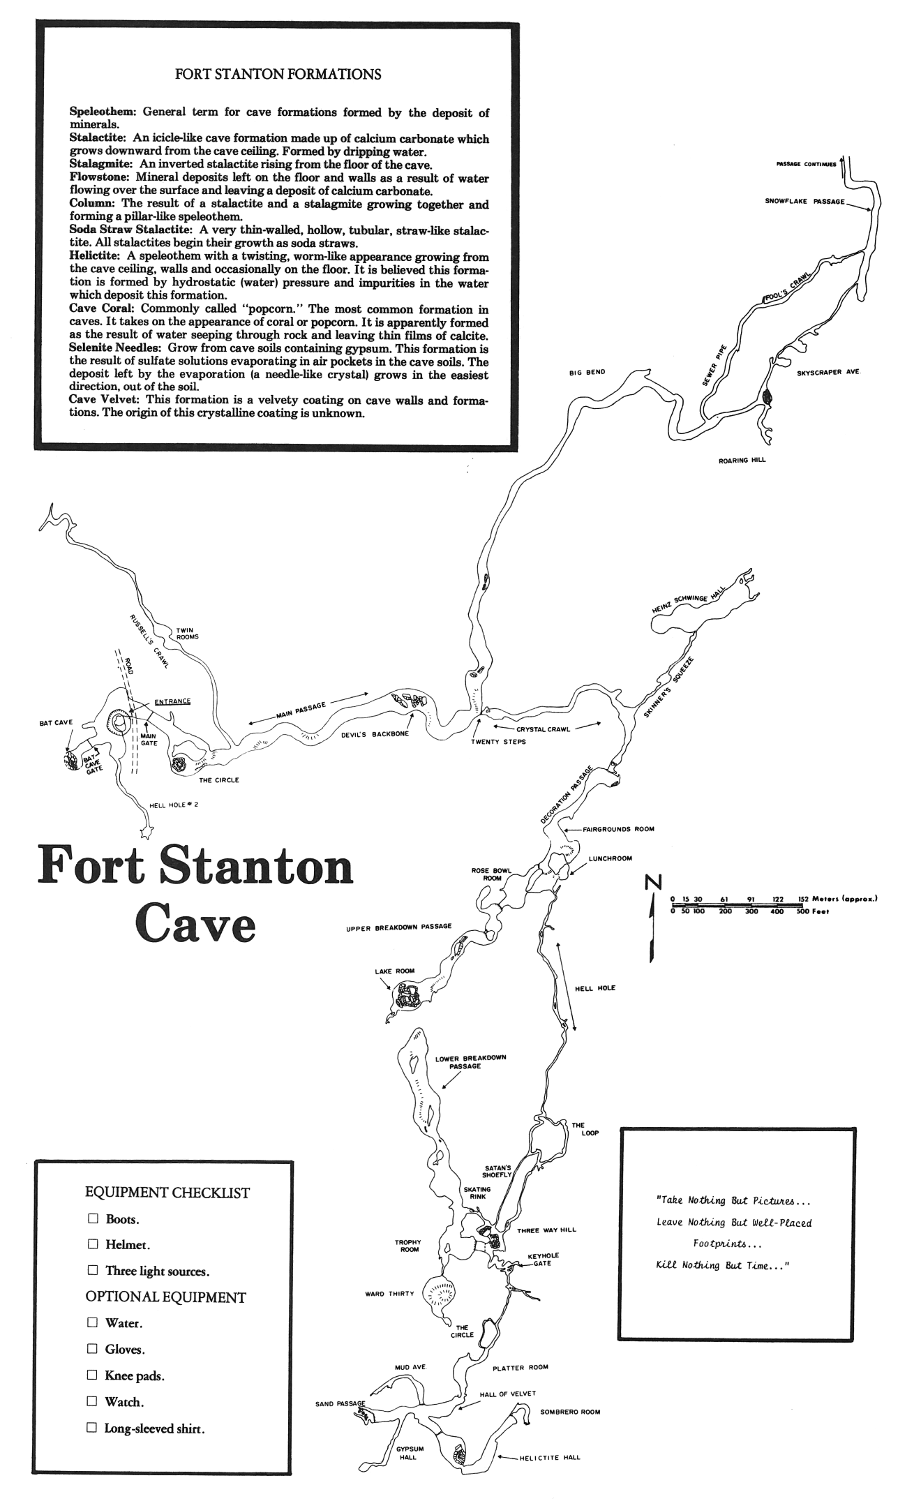 The old tourist map of Fort Stanton Cave.